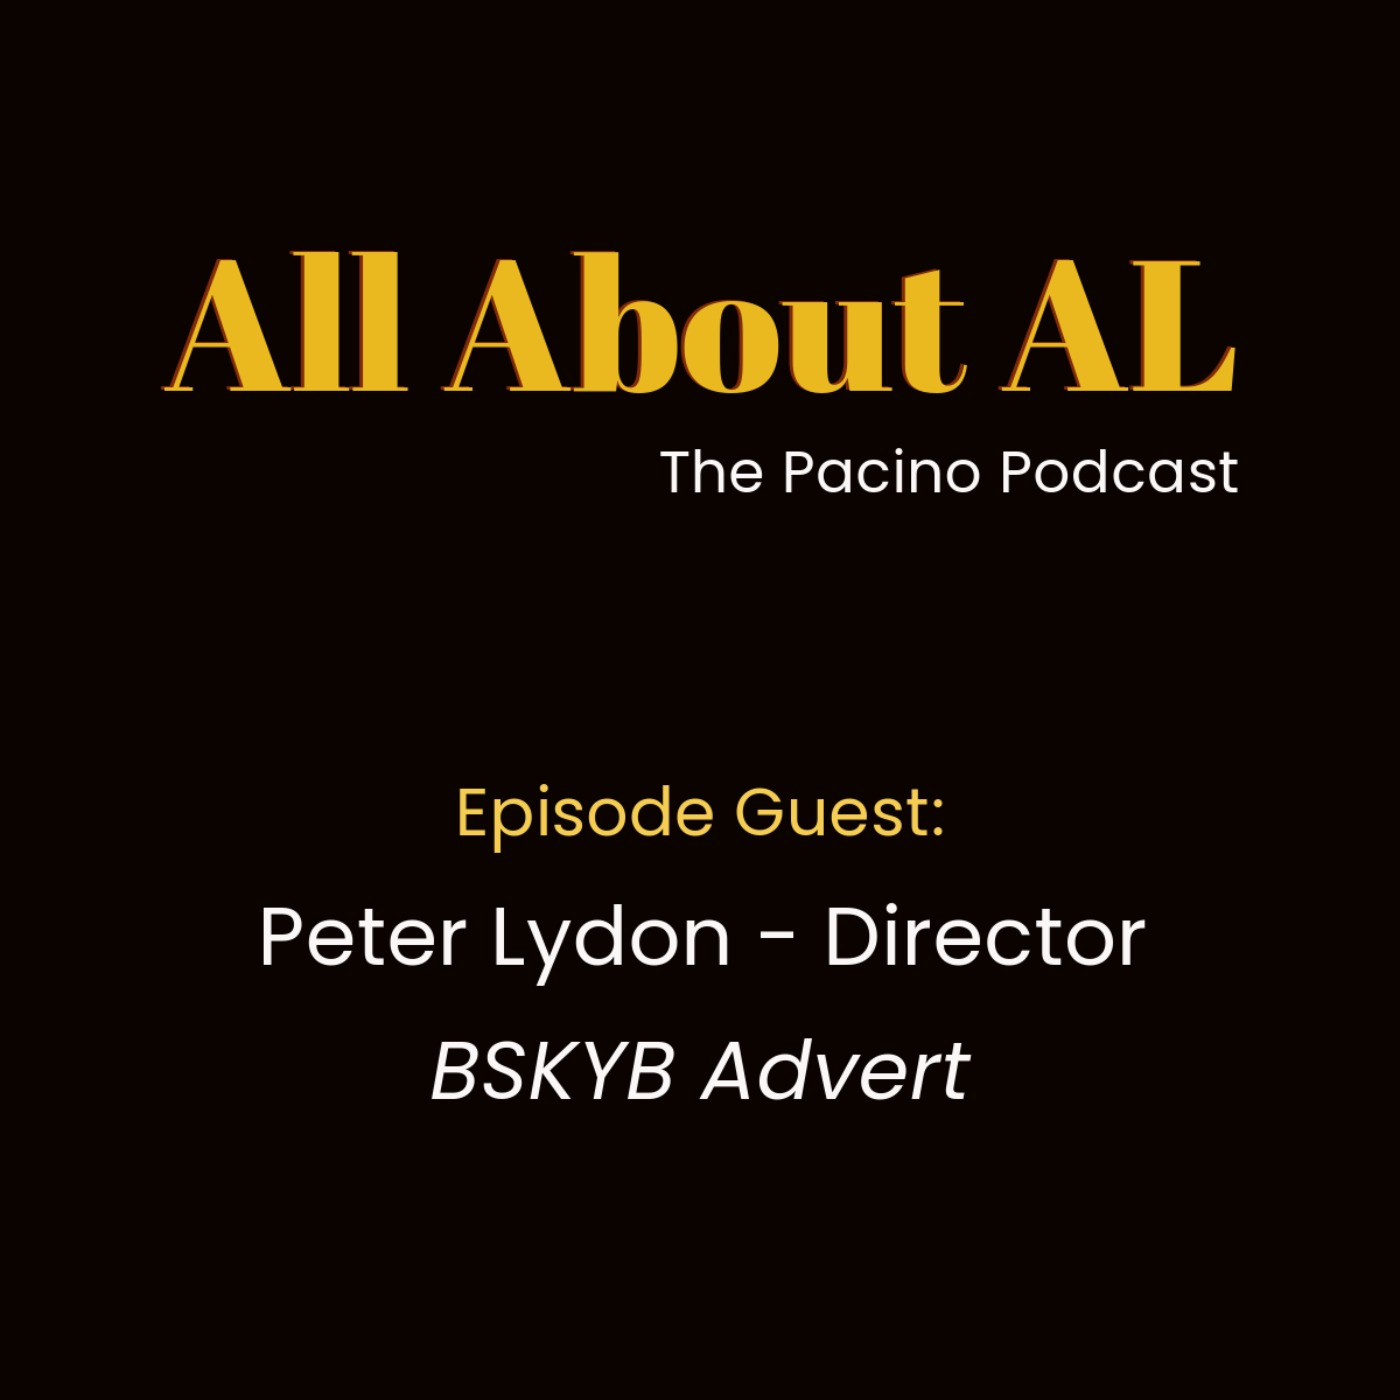 Episode 14: BSKYB Advert with Peter Lydon